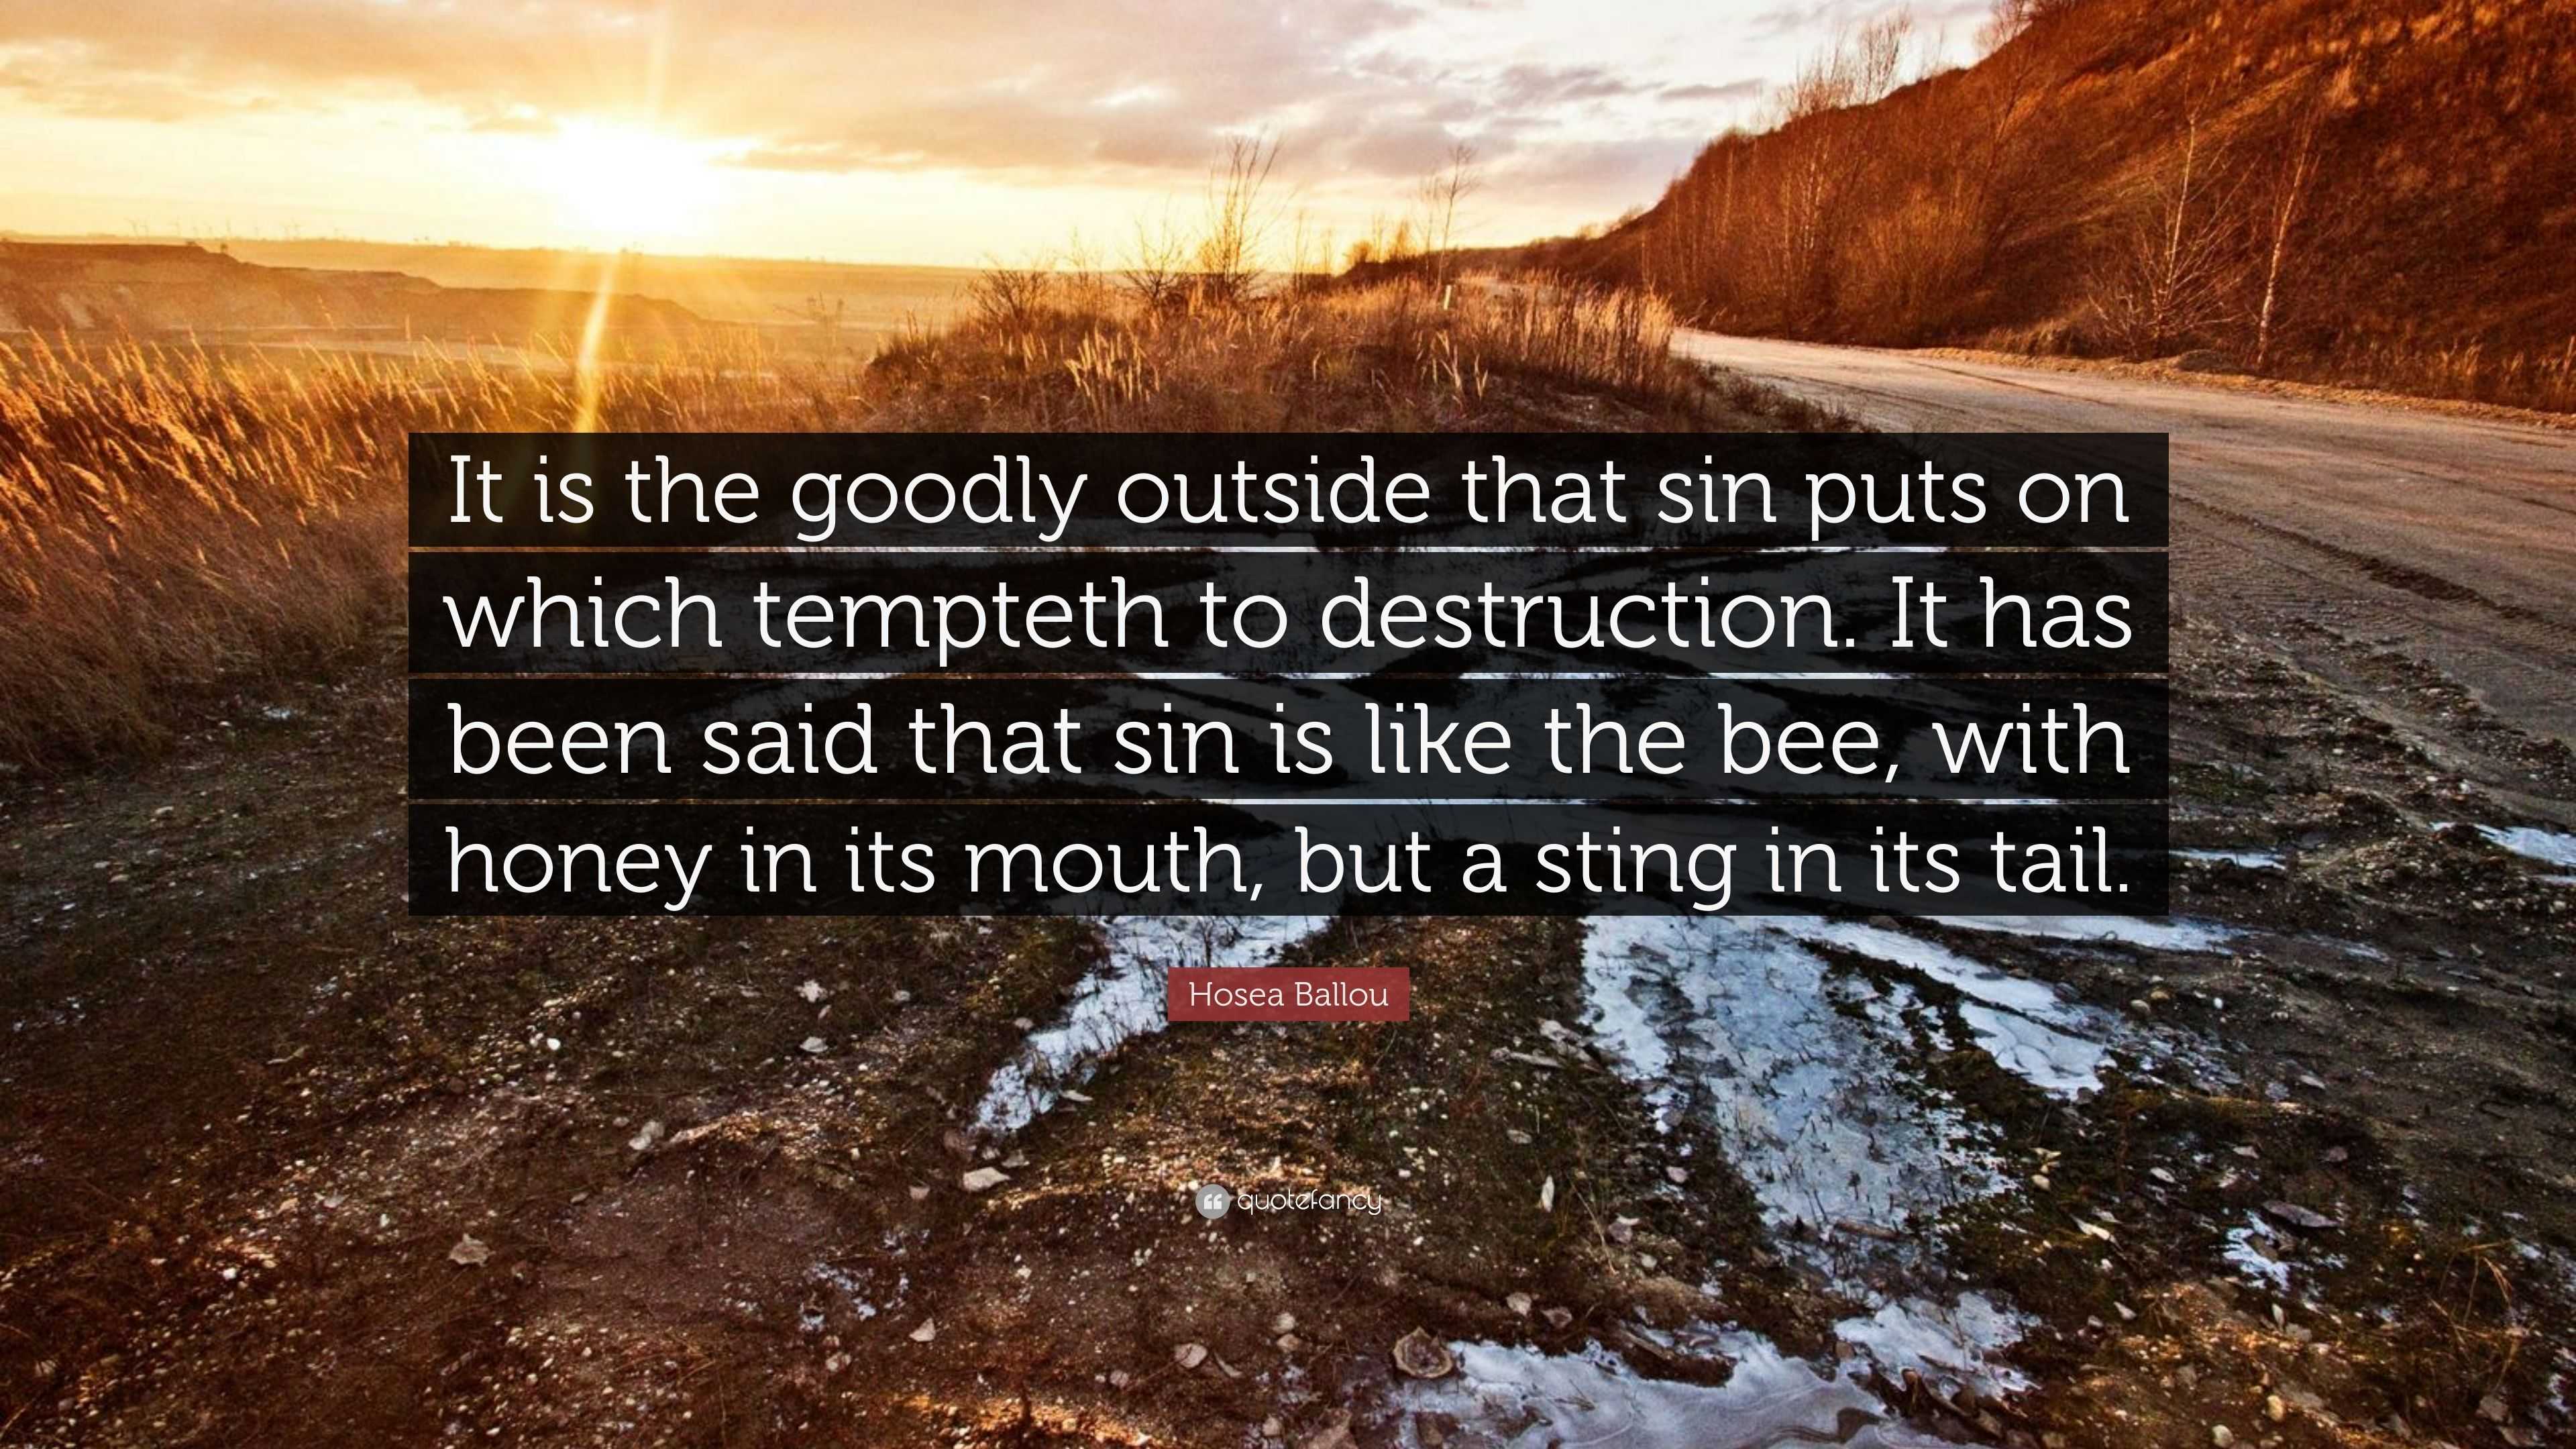 Hosea Ballou Quote: “It is the goodly outside that sin puts on which  tempteth to destruction. It has been said that sin is like the bee